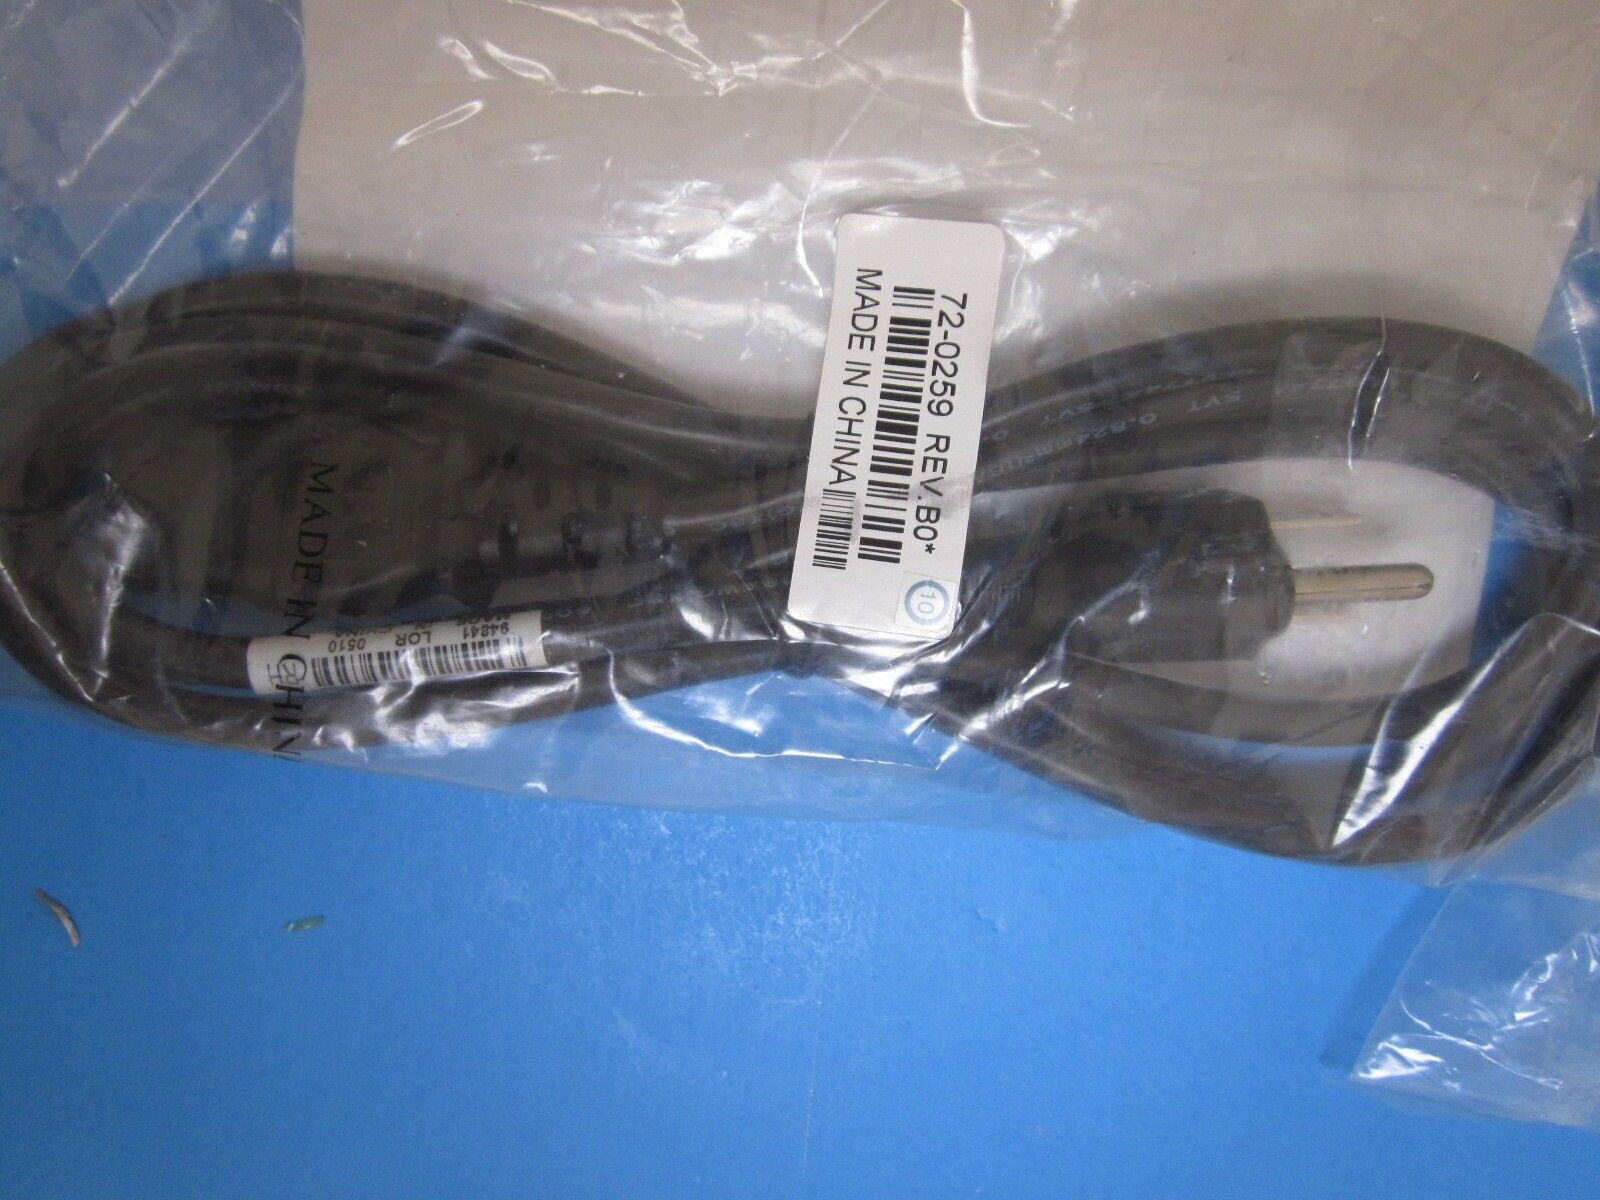 Cisco Power Cord 7900 Services, 72-0259, New, Lot of 11